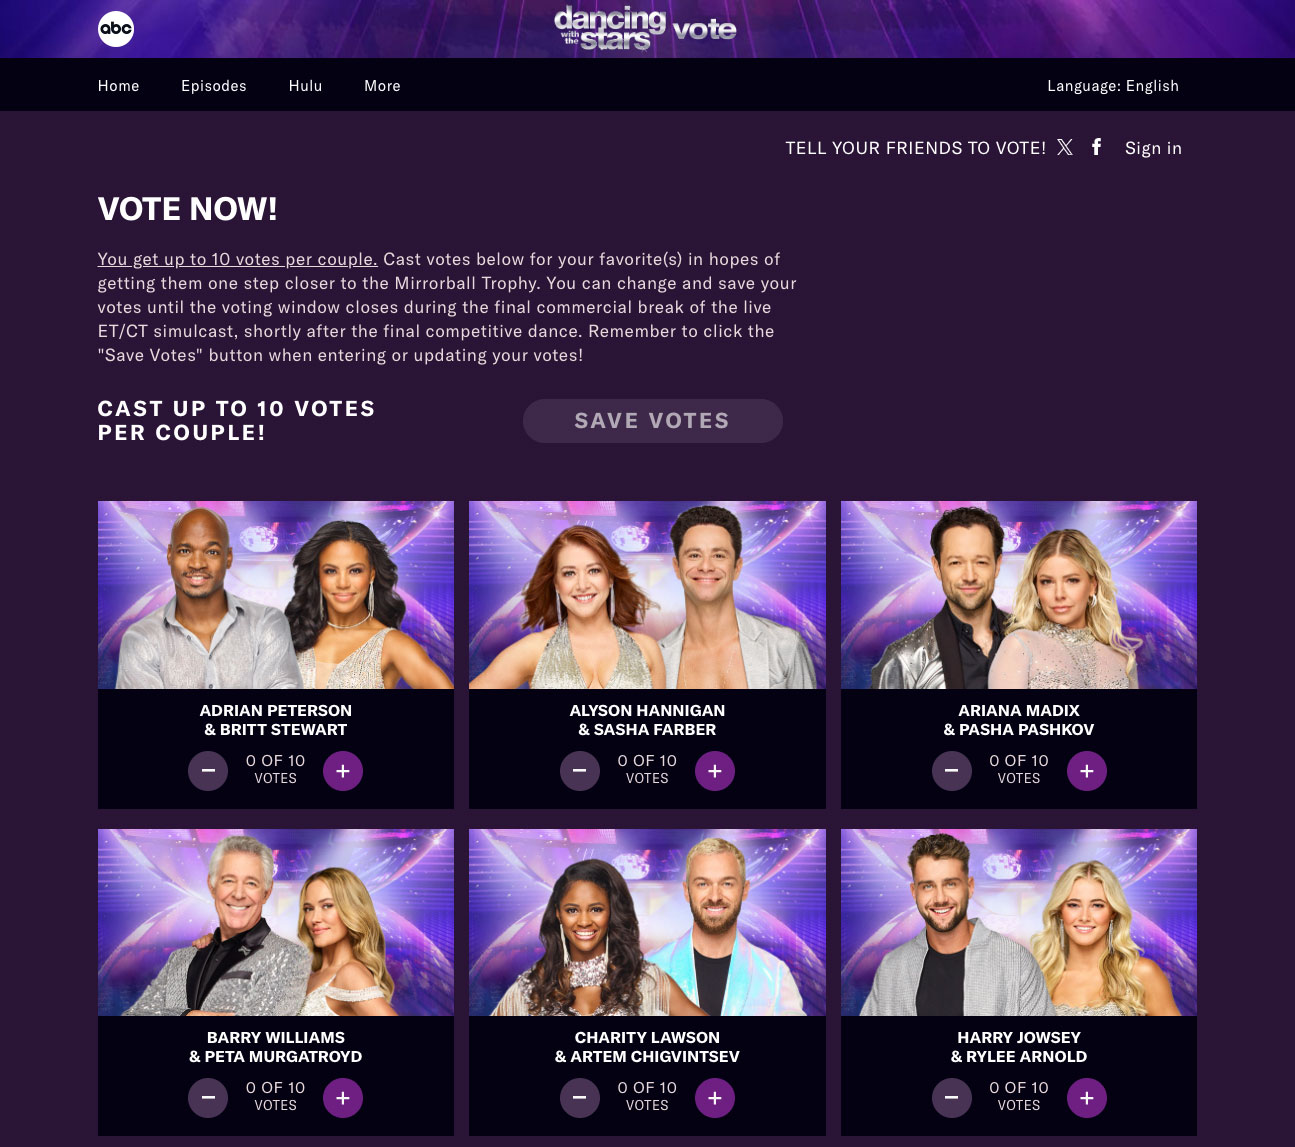 Dancing with the Stars online voting page